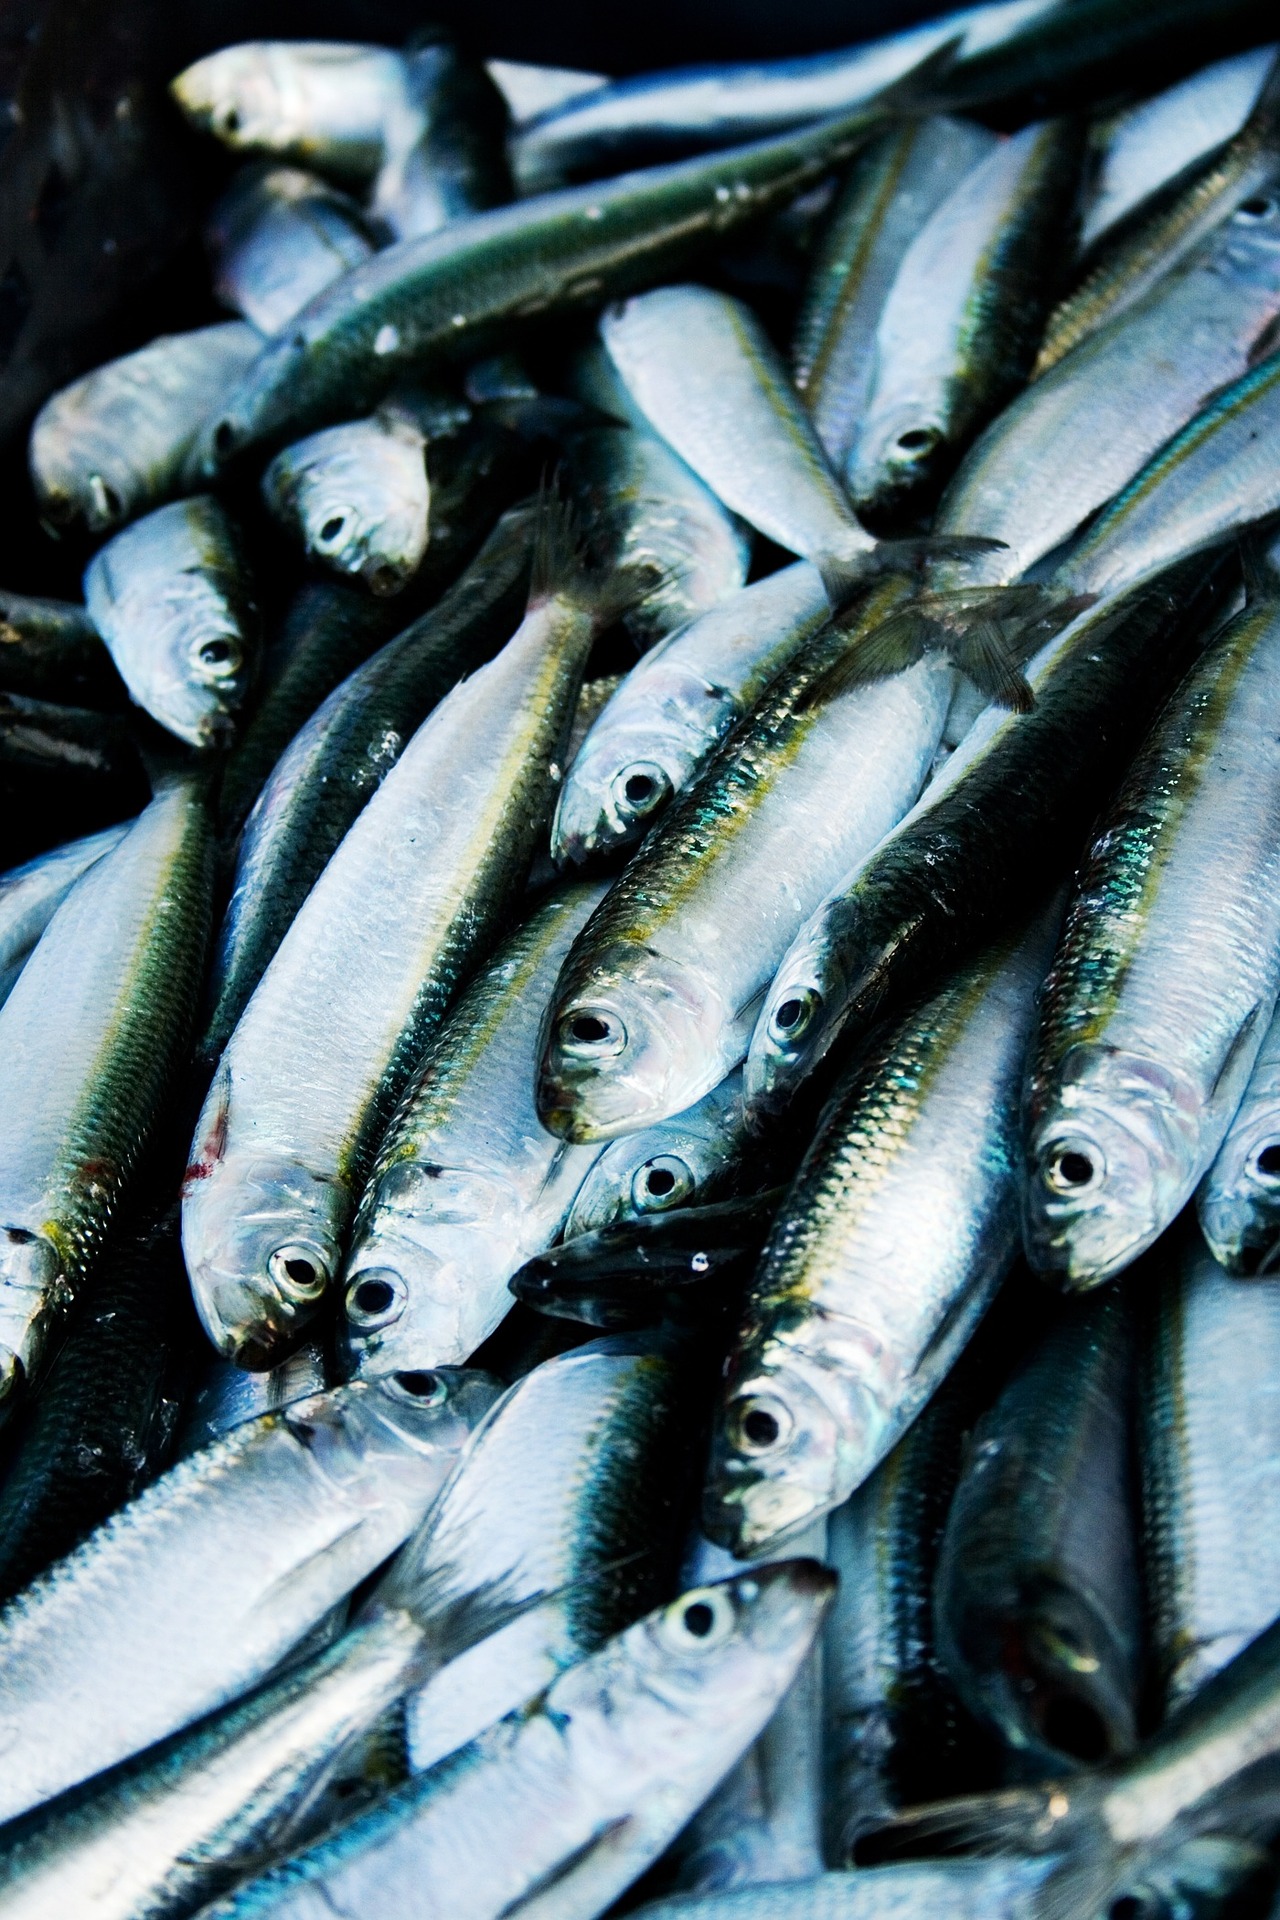 Strong herring catches and low prices